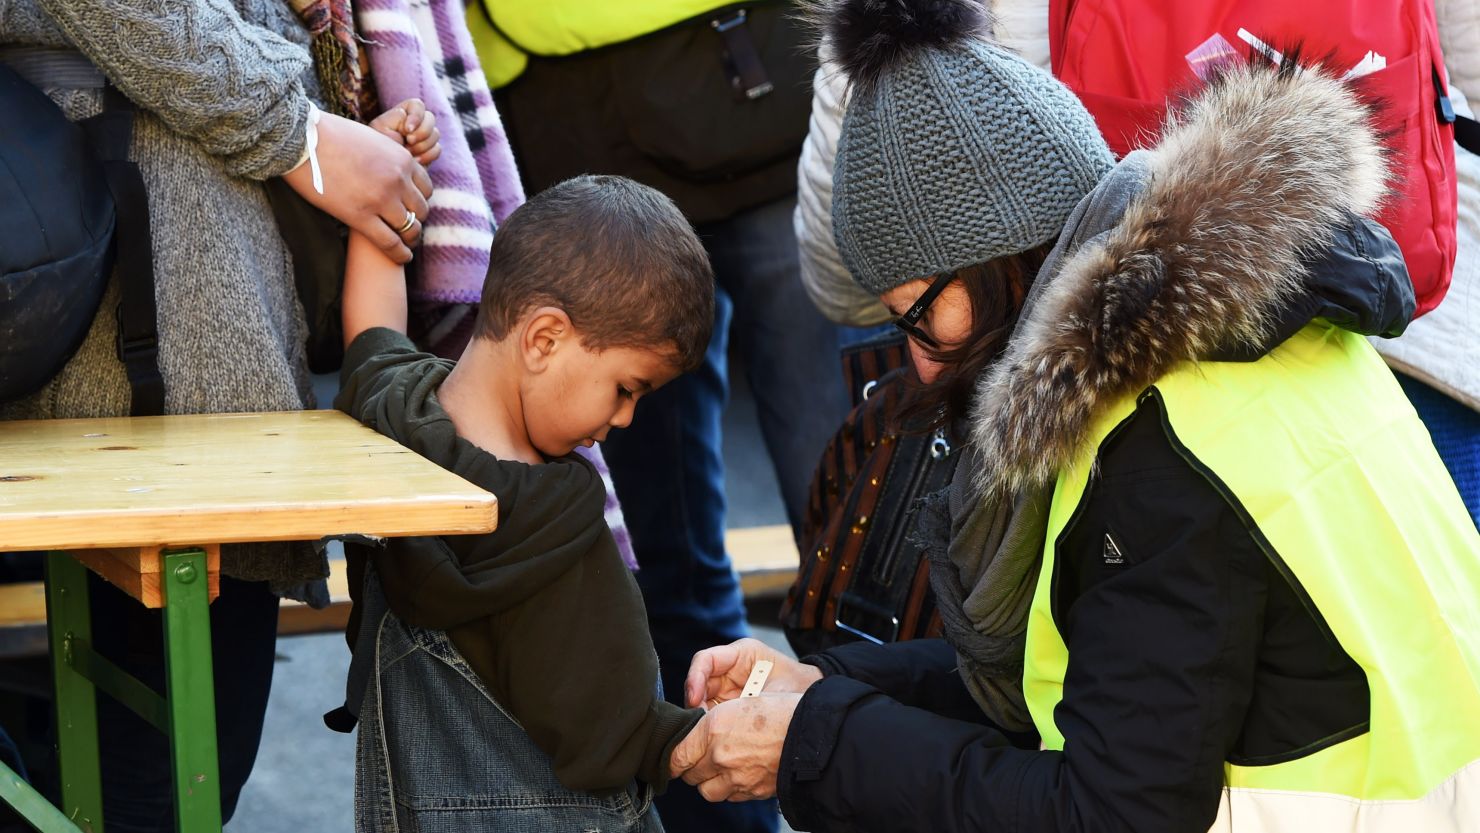 Migrants are issued wristbands after arriving at the Austrian-German border in October.